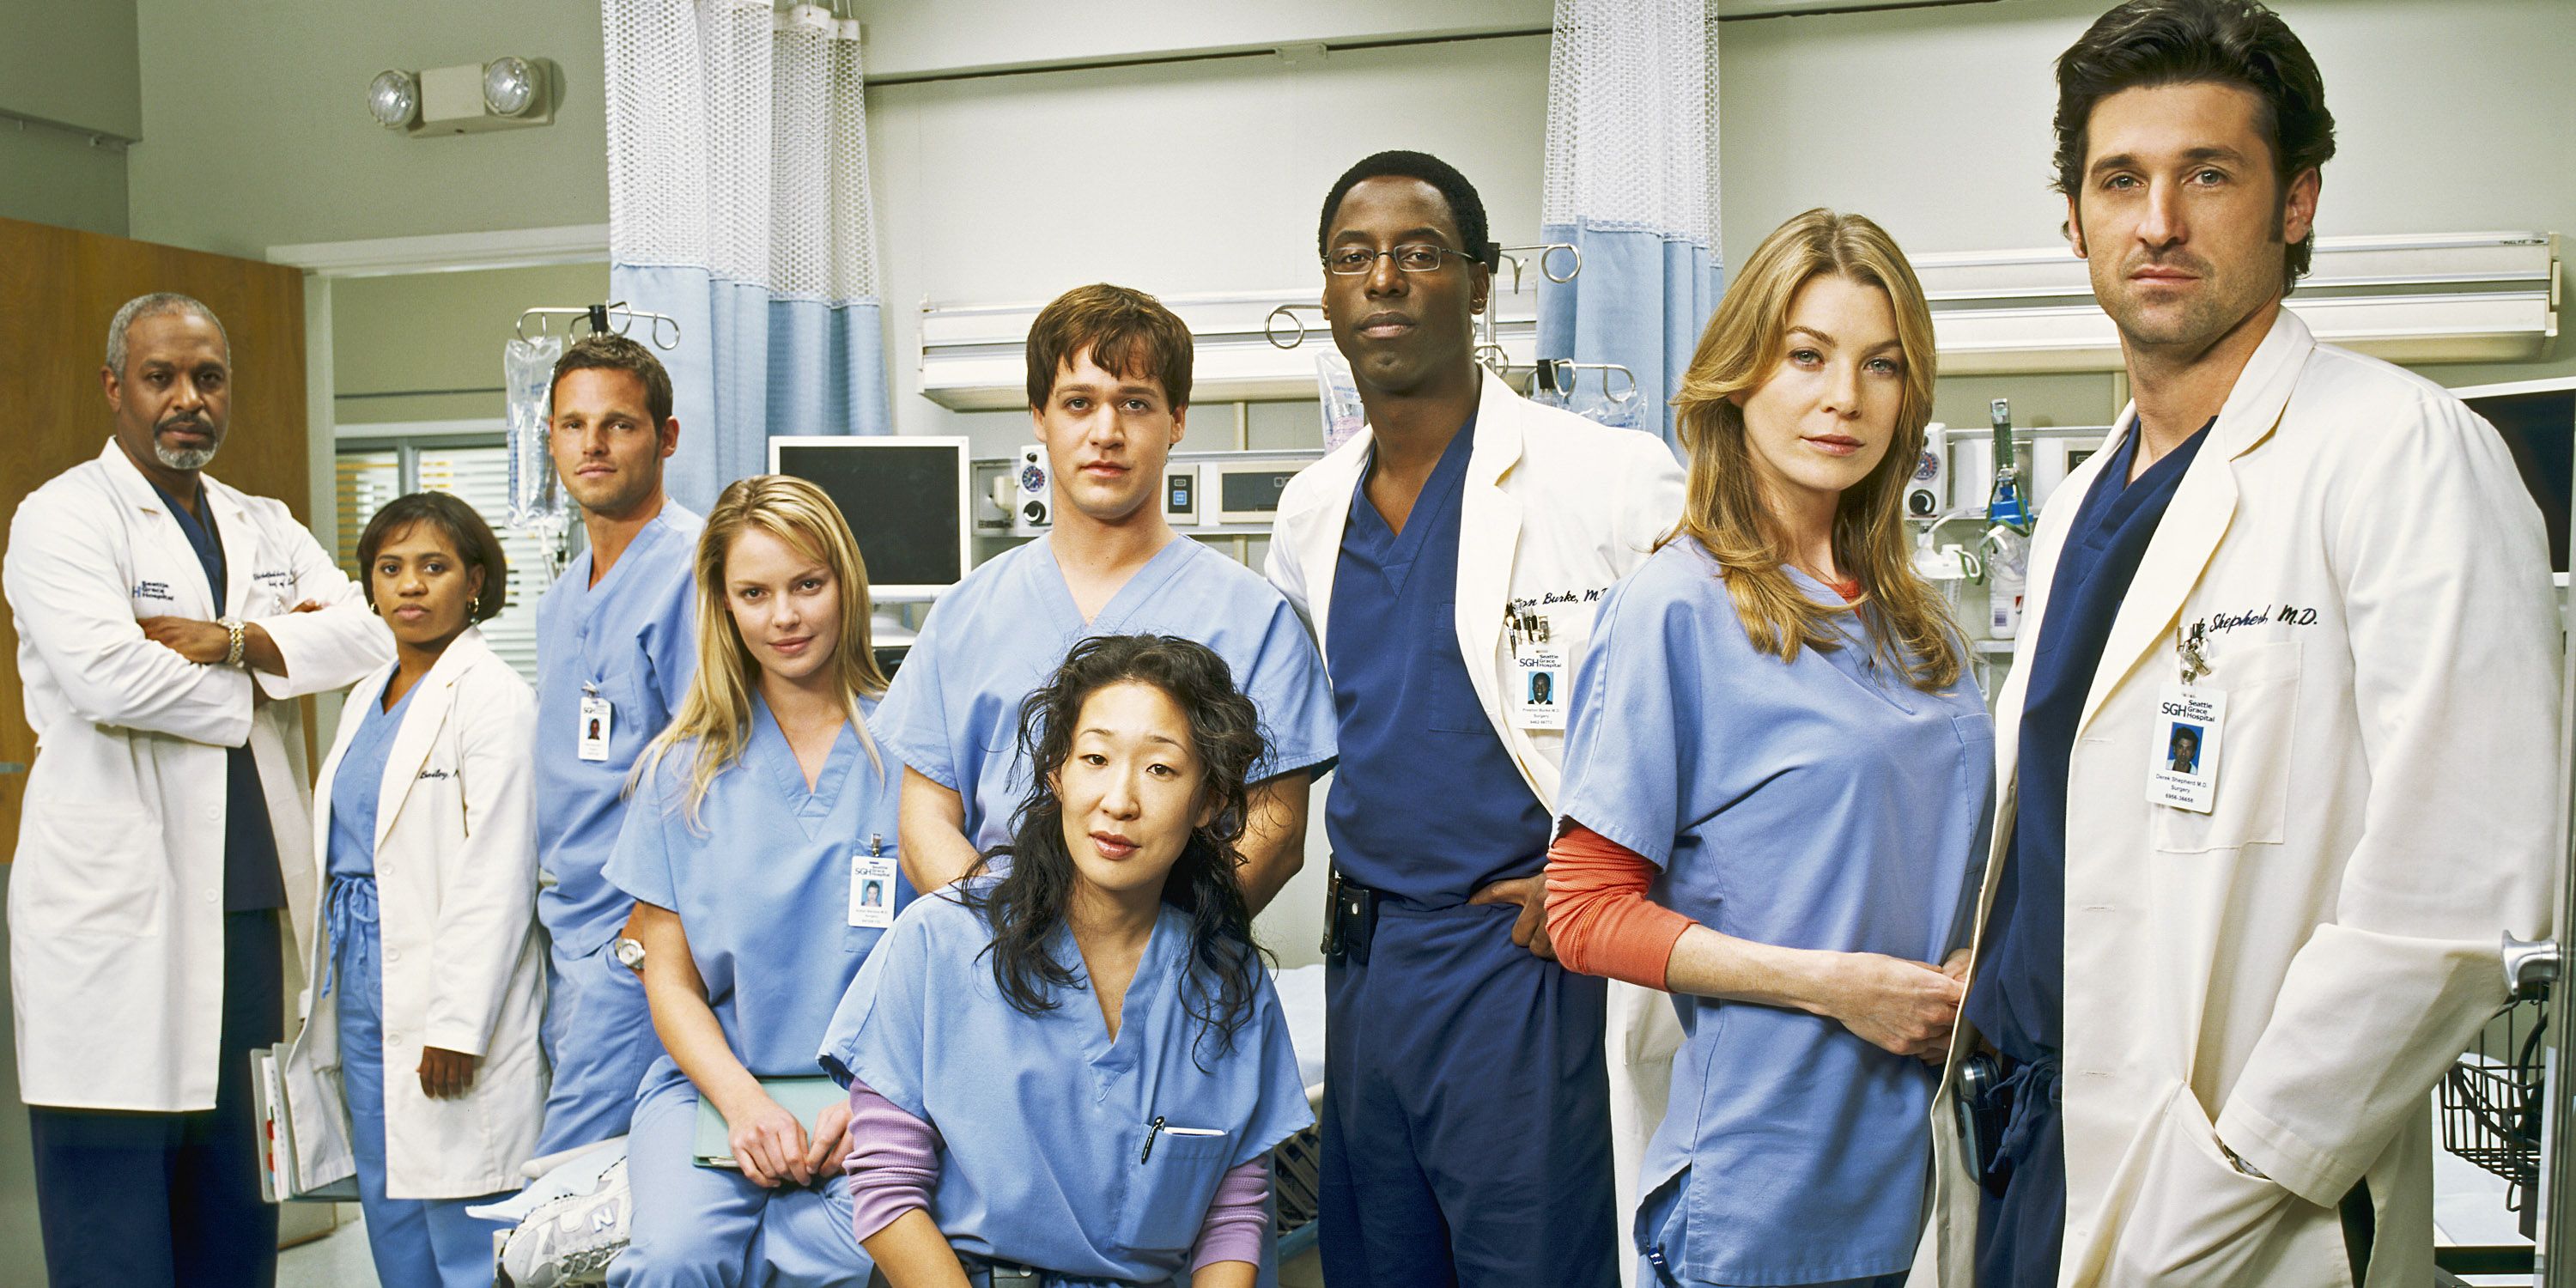 20 Fascinating Facts You Never Knew About Grey's Anatomy - Shonda